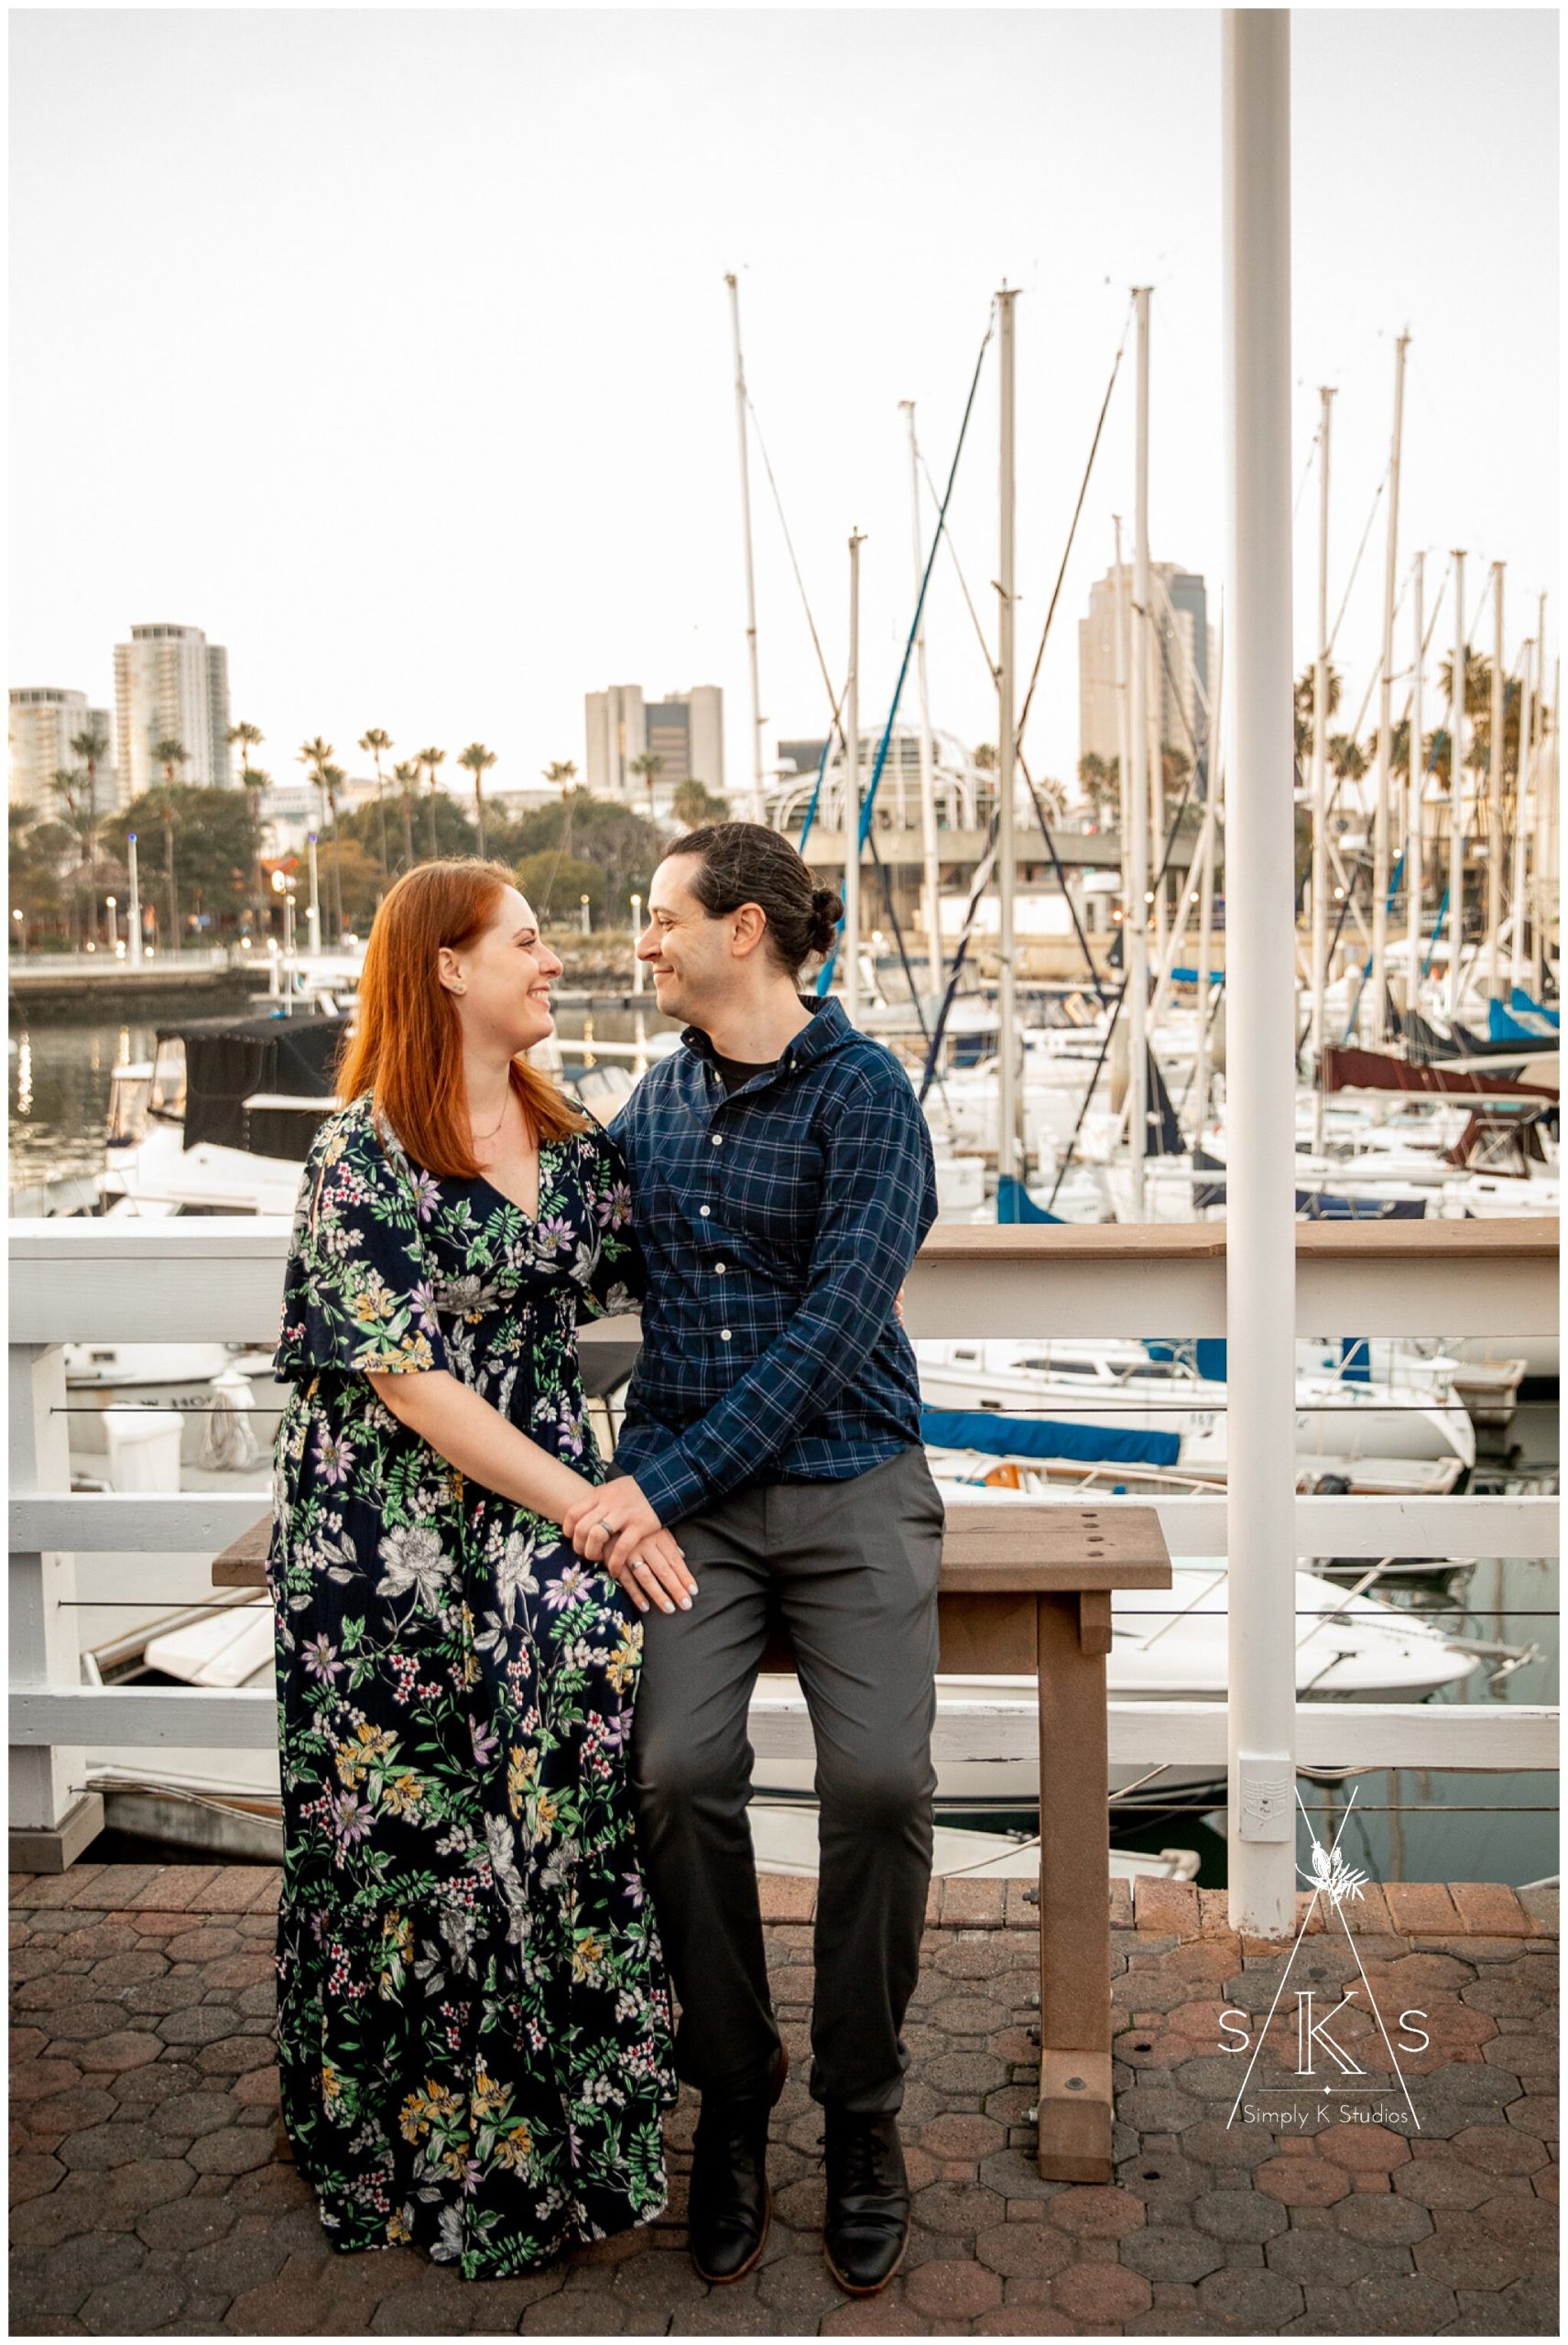  Engaged couple sitting on a bench with sailboats in the background 